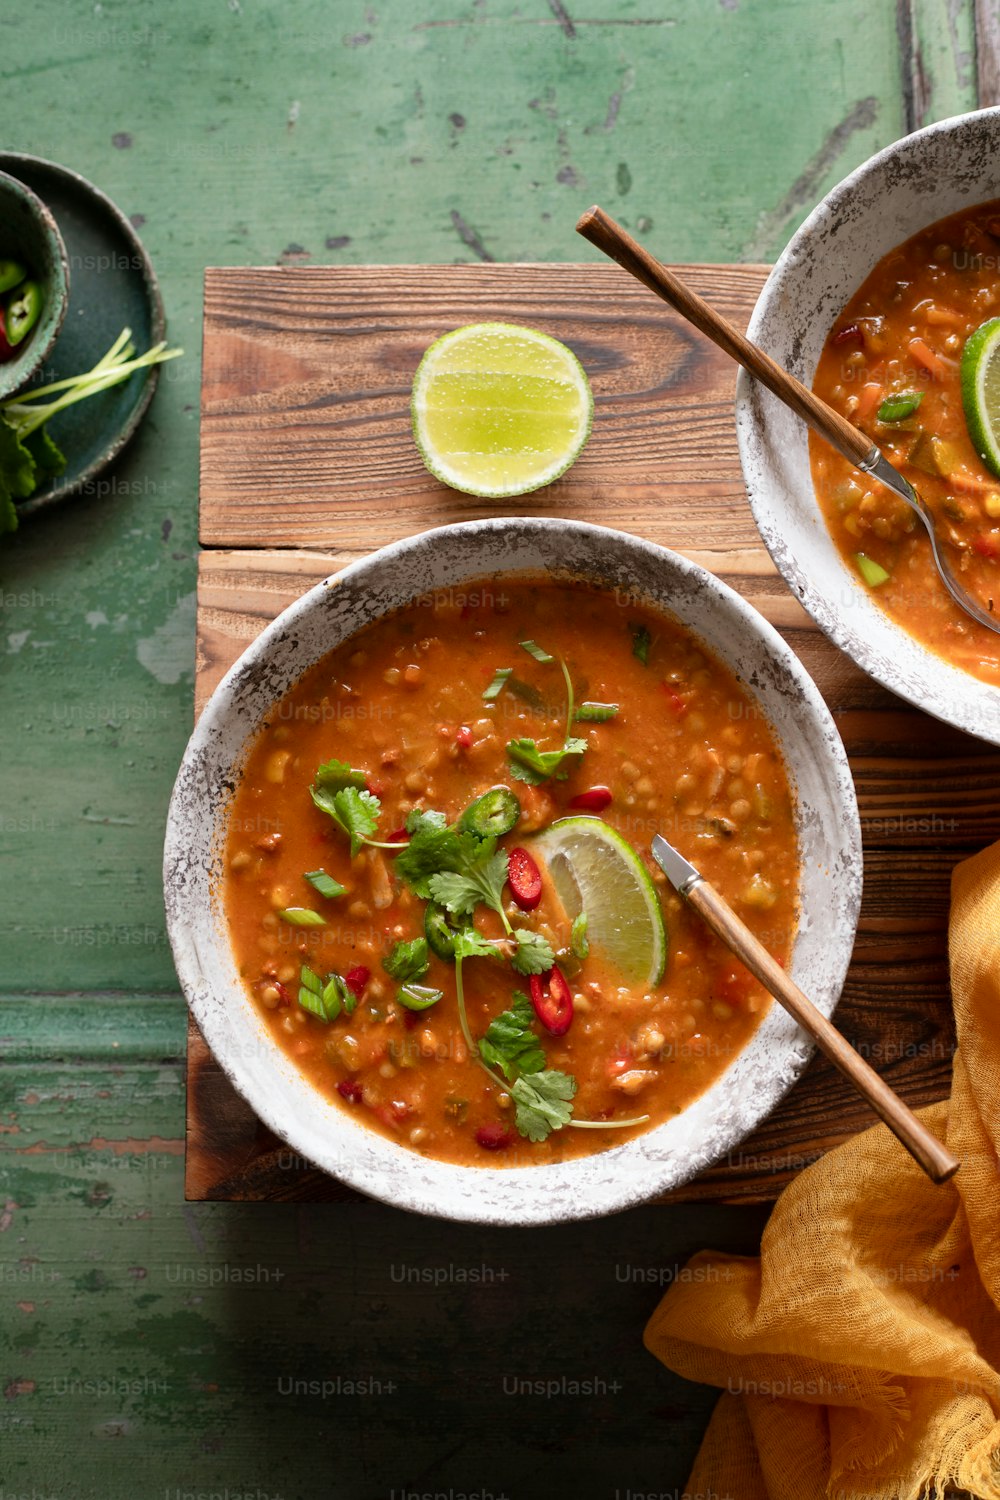 two bowls of chili soup with limes and cilantro